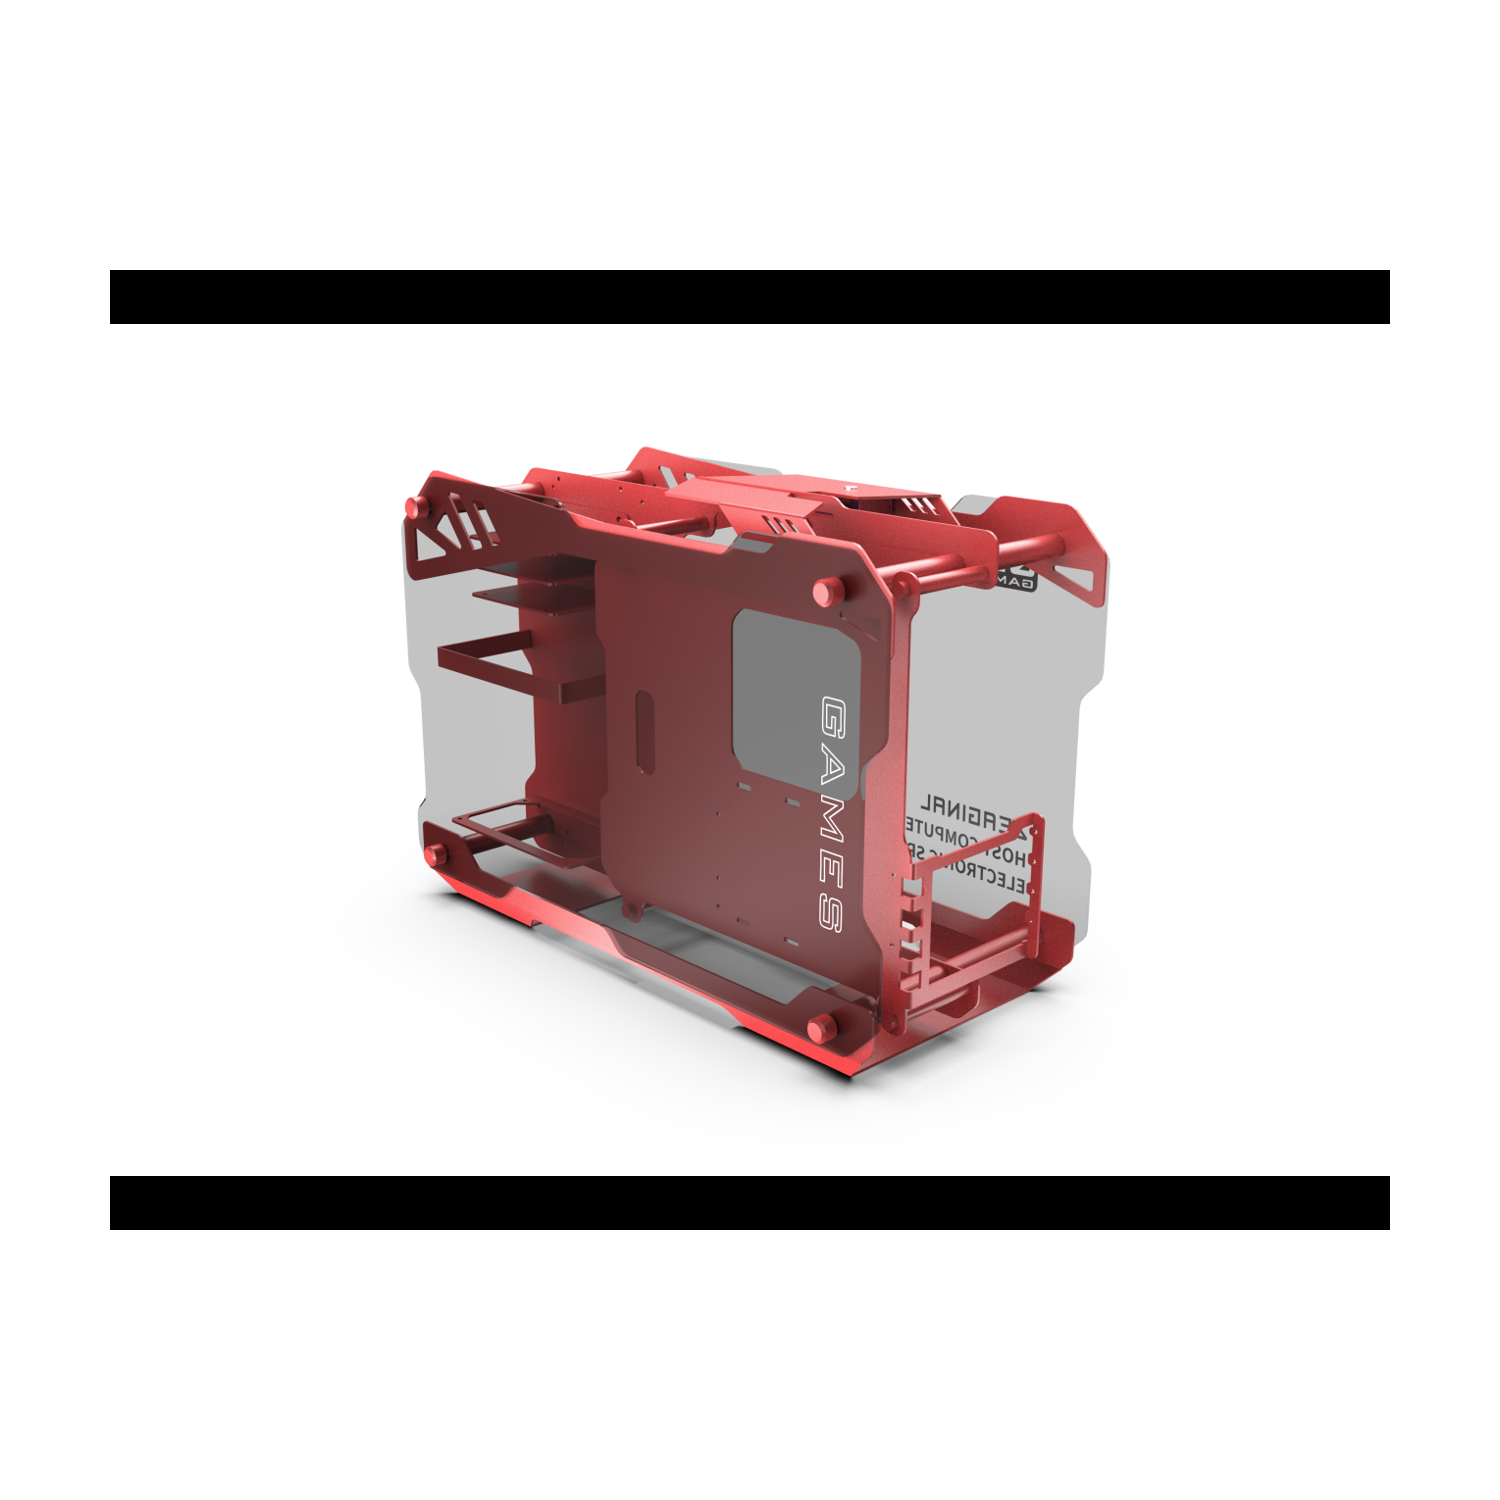 H.E. ZC-02M Tempered Glass Mini Computer Case Support 240mm Radiator Support M-ATX Motherboard USB 3.0 -Red